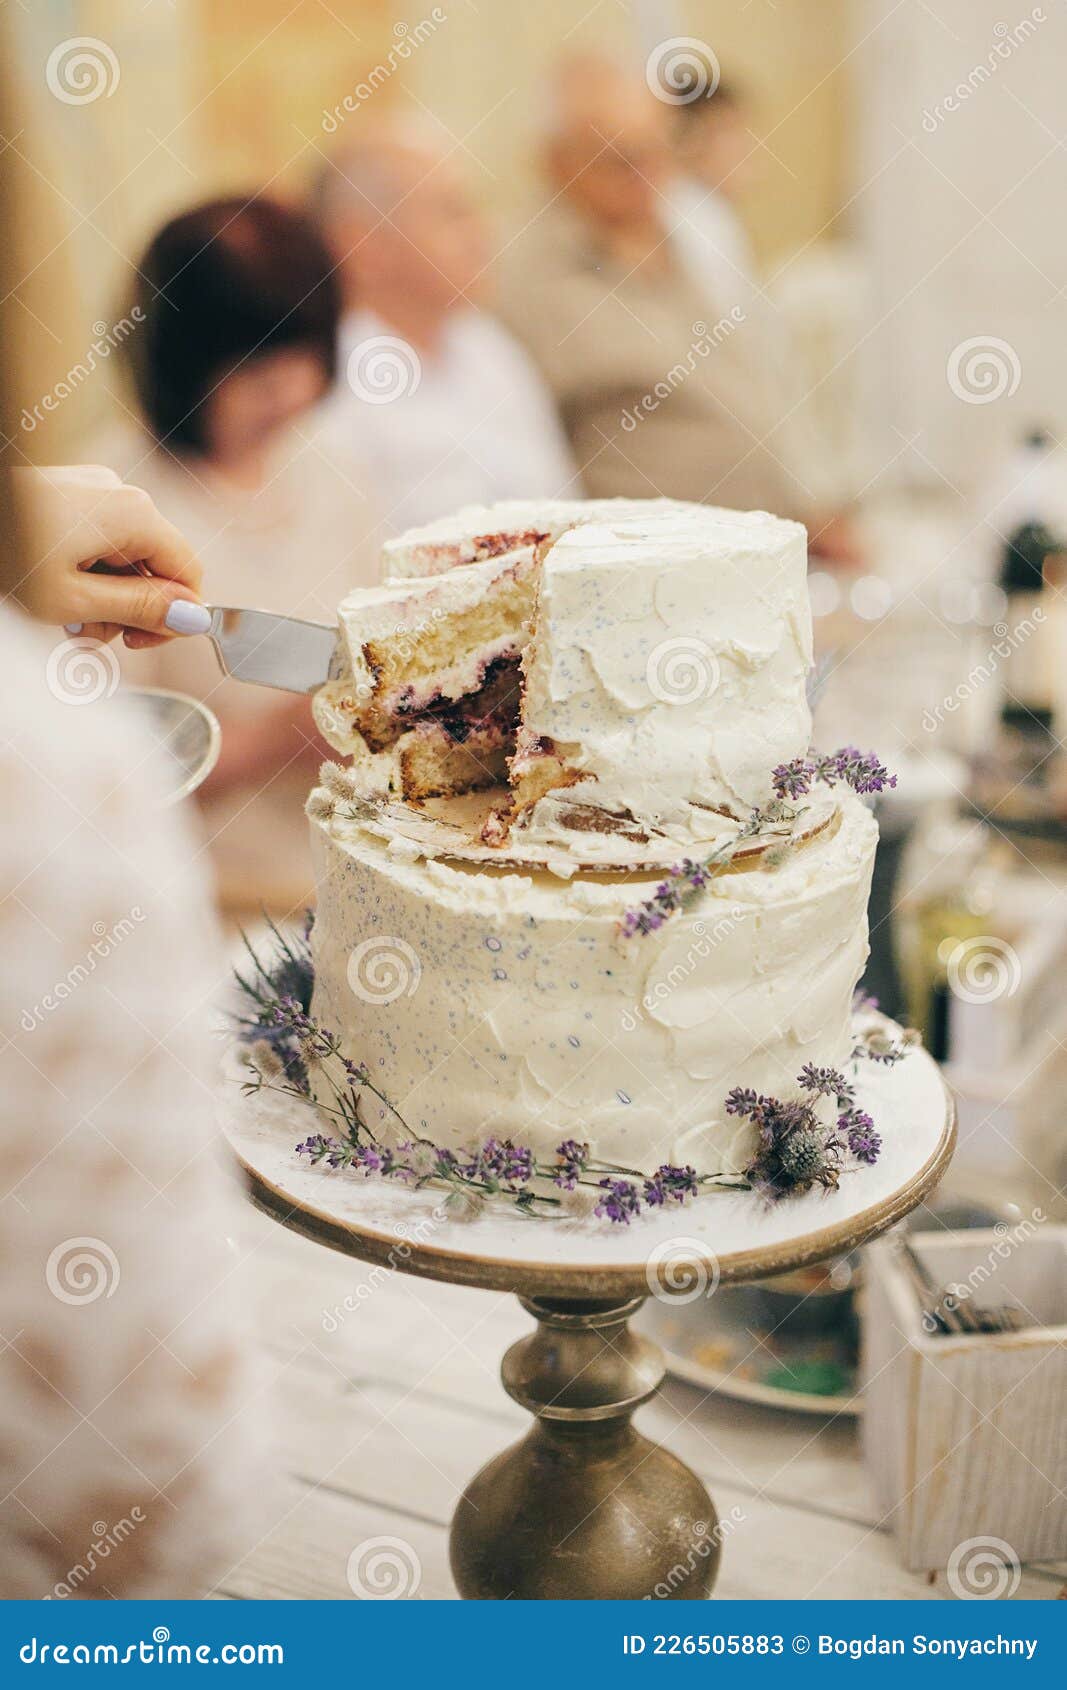 Hands of Bride and Groom Cutting Delicious Modern Cake in ...